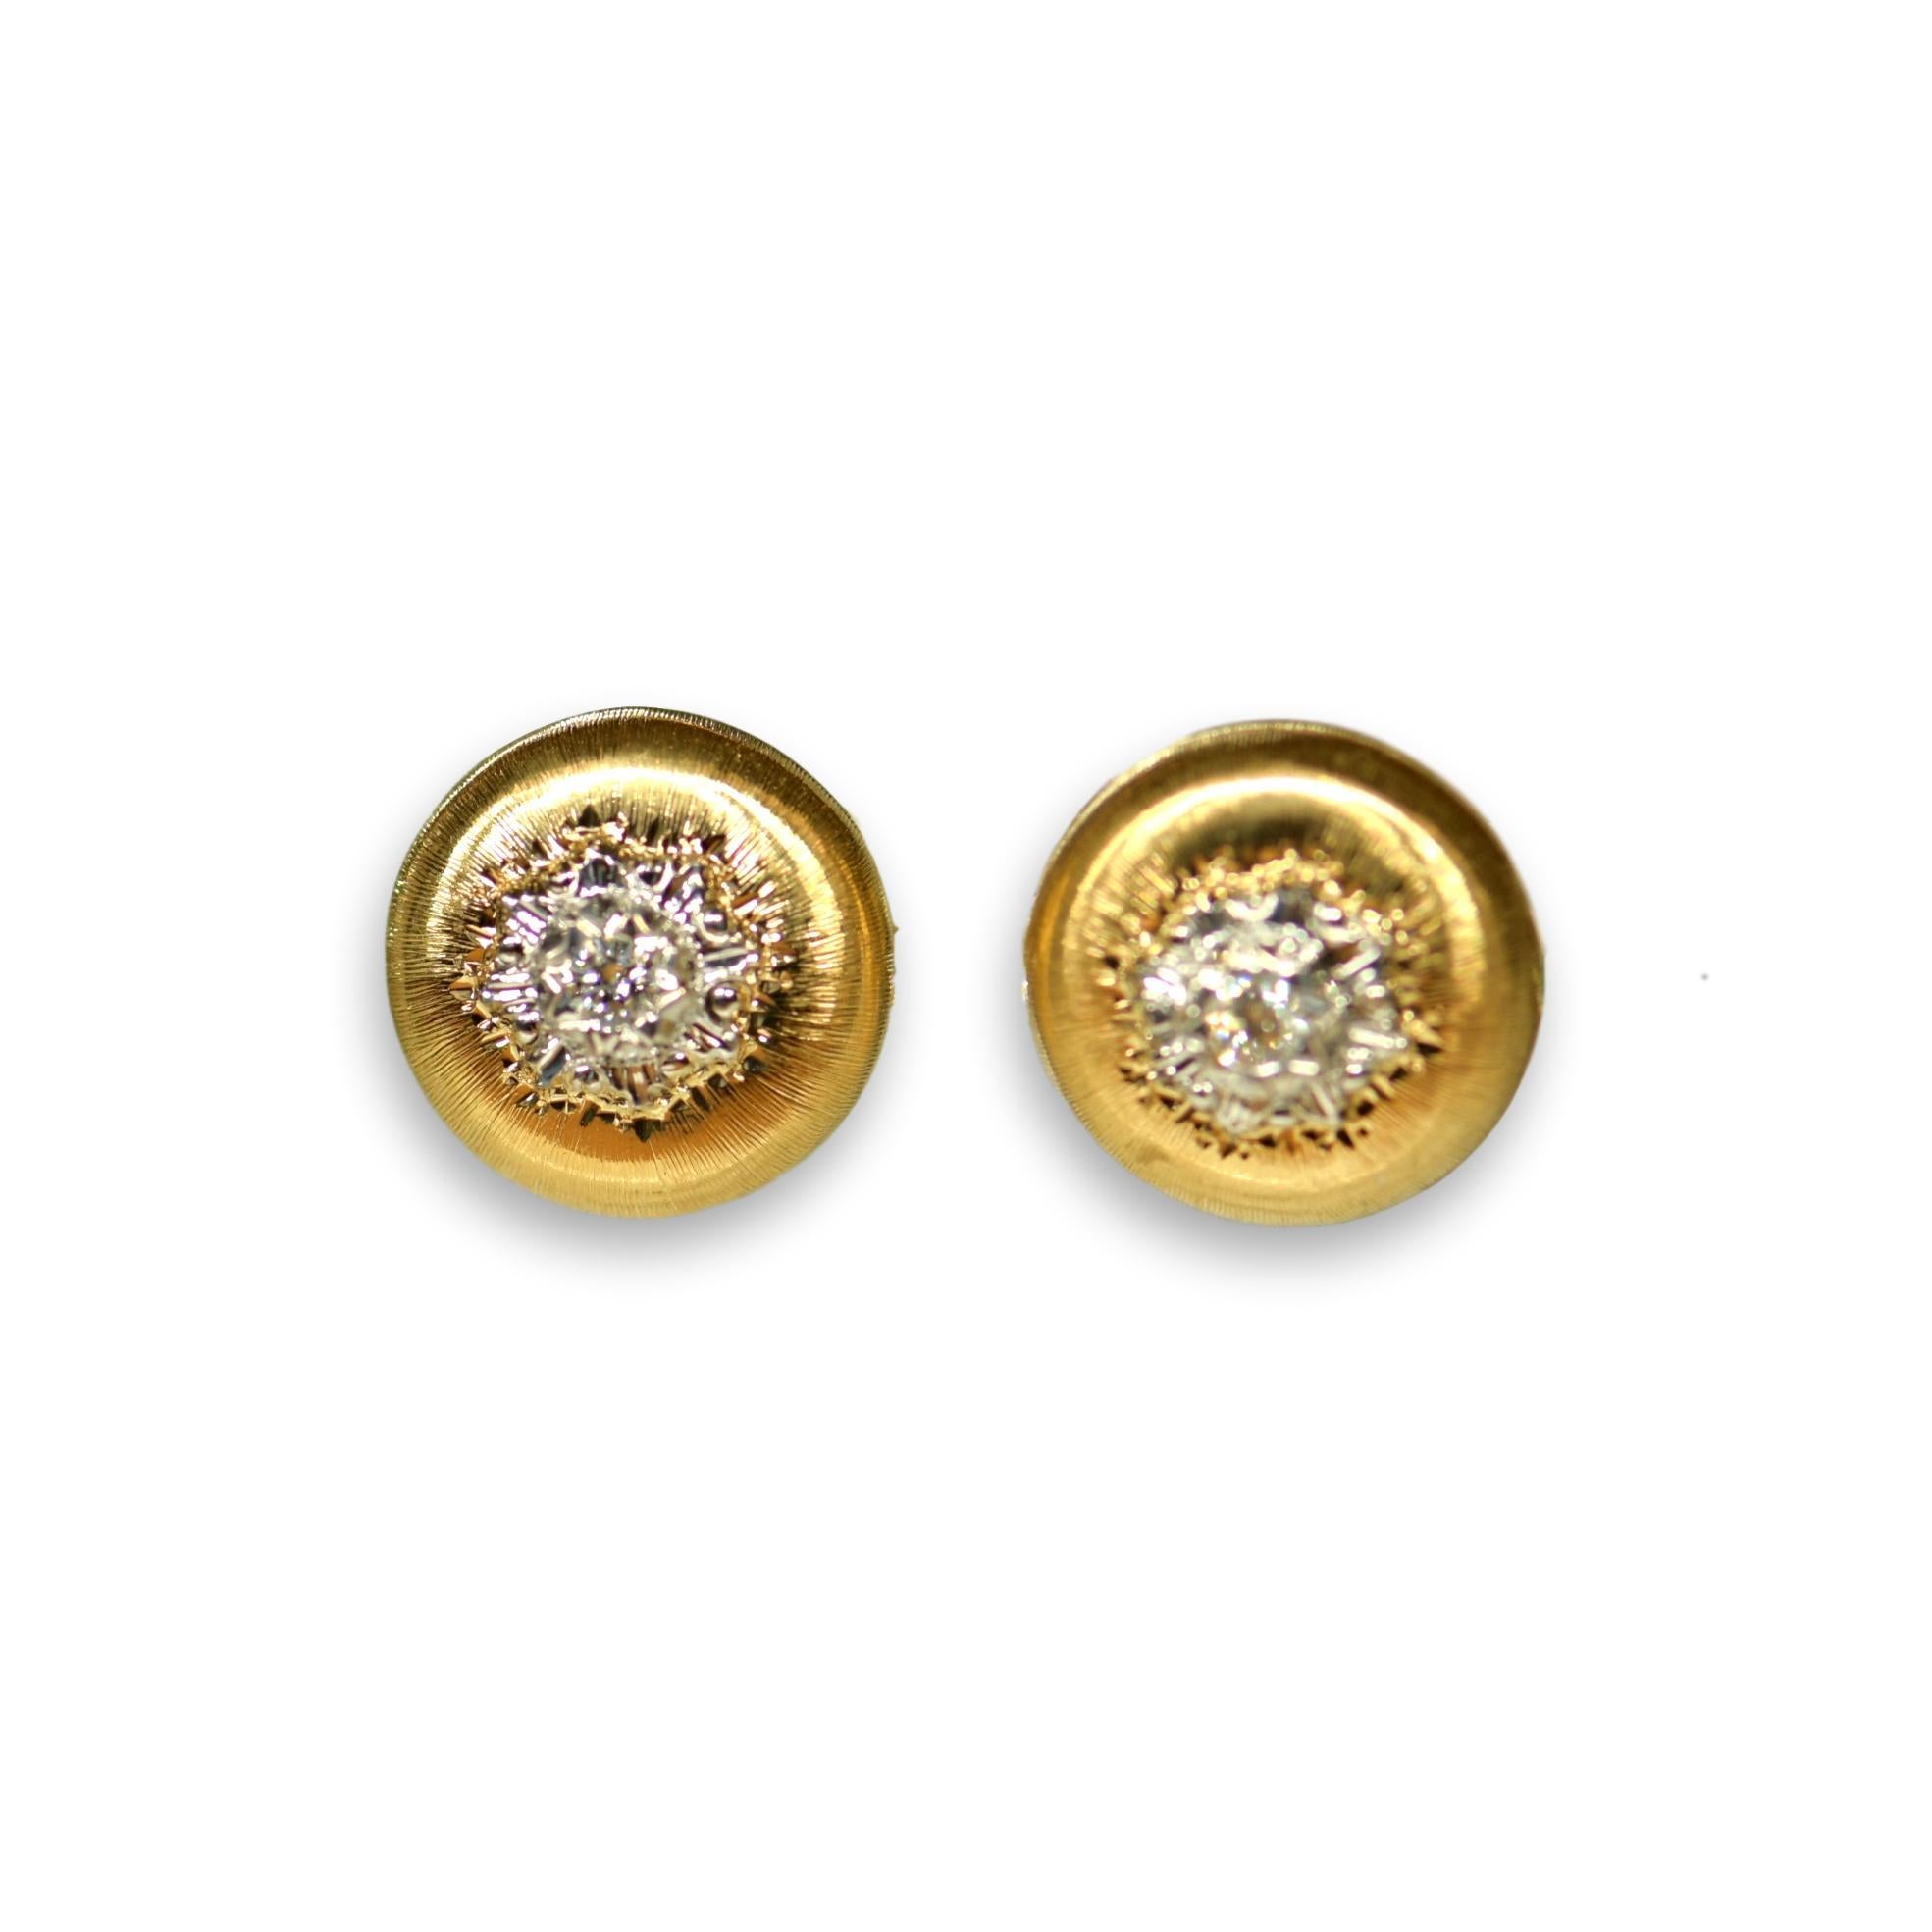 Pair of 18 Karat Gold and Diamond Stud Earrings In Excellent Condition For Sale In Banbury, GB